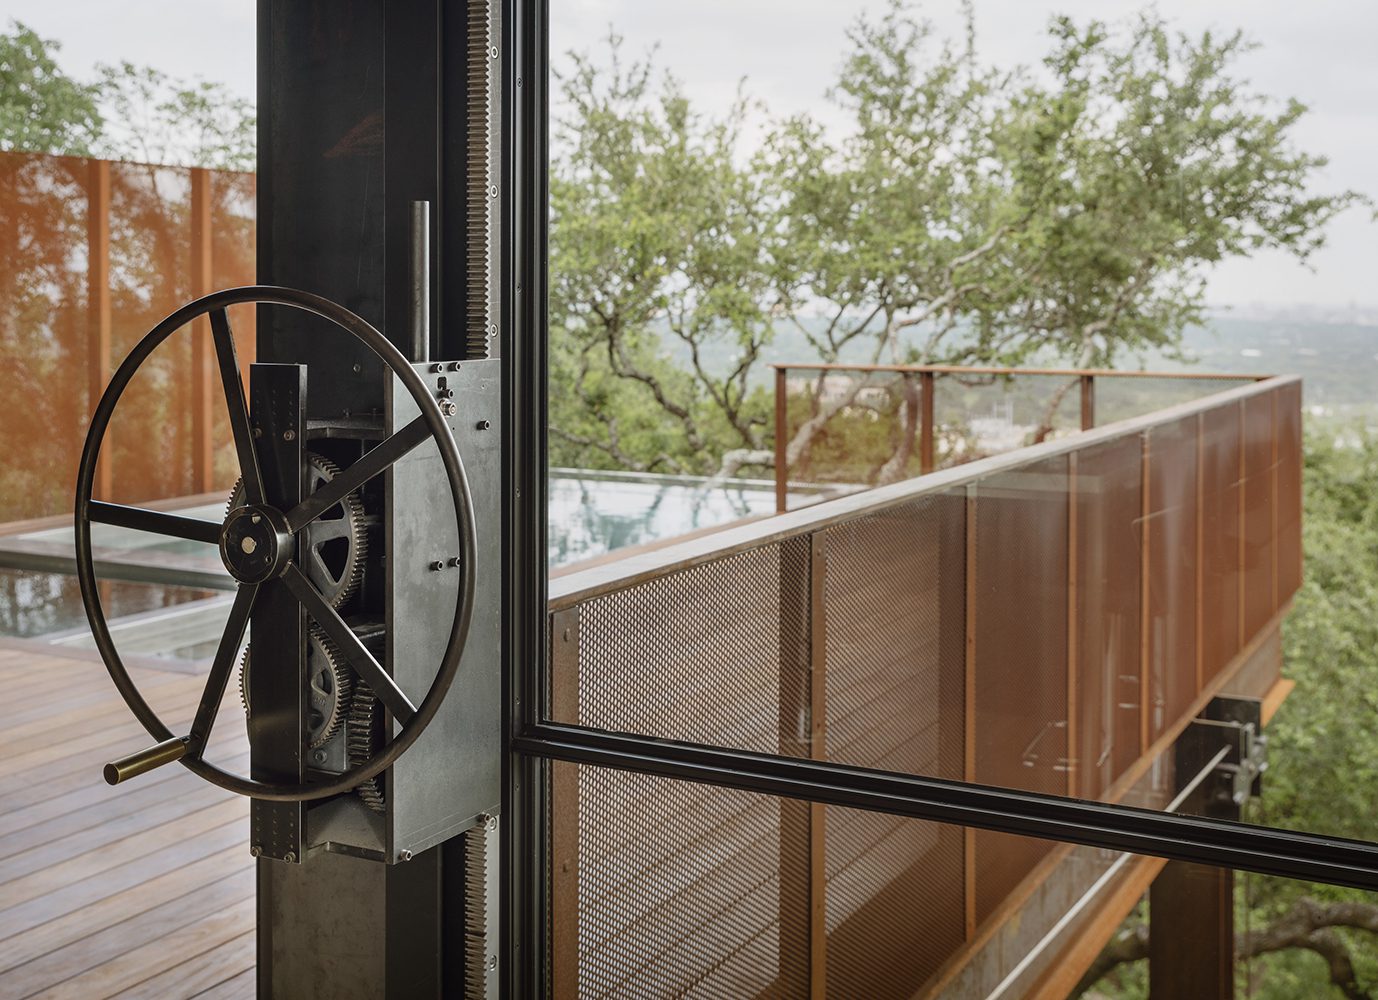 hand operated wheel with exposed counterweights to lower massive window wall